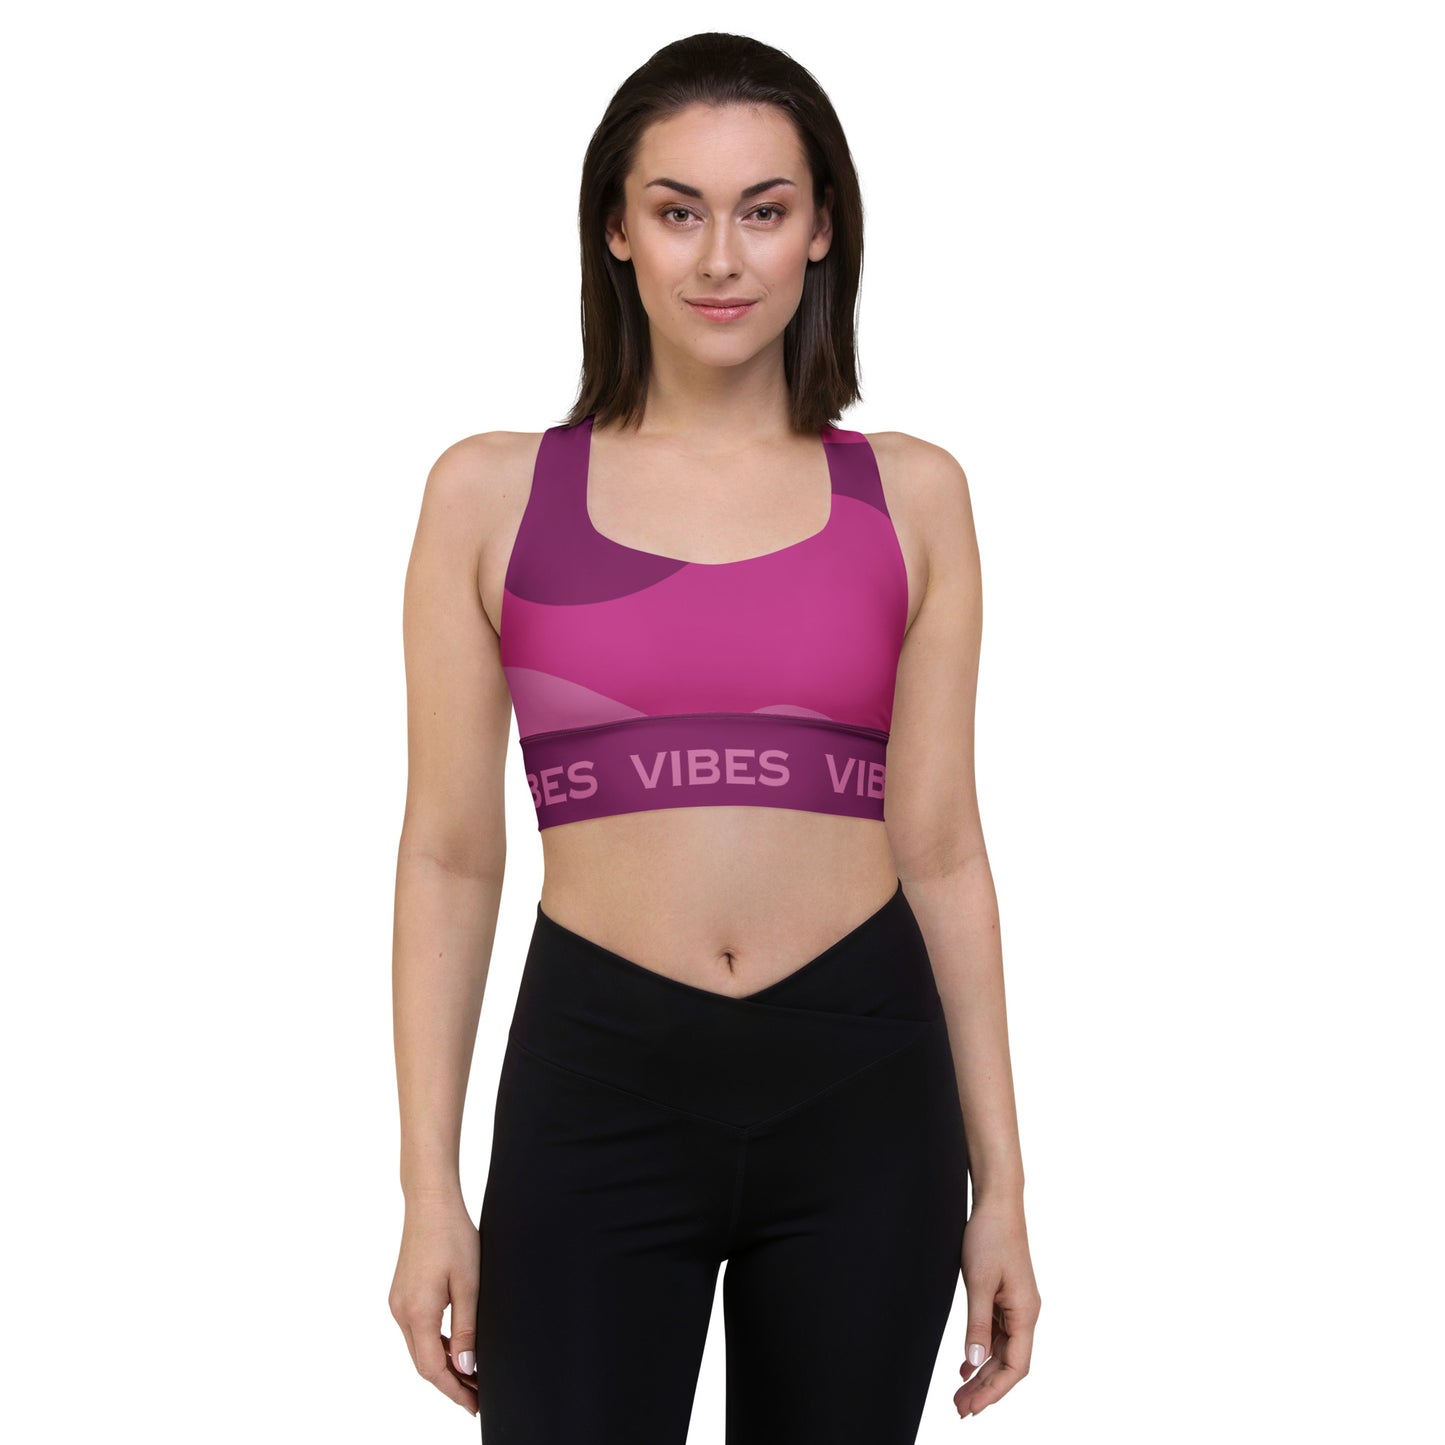 TIME OF VIBES - Longline sports bra ABSTRACT (Pink) - €49.00